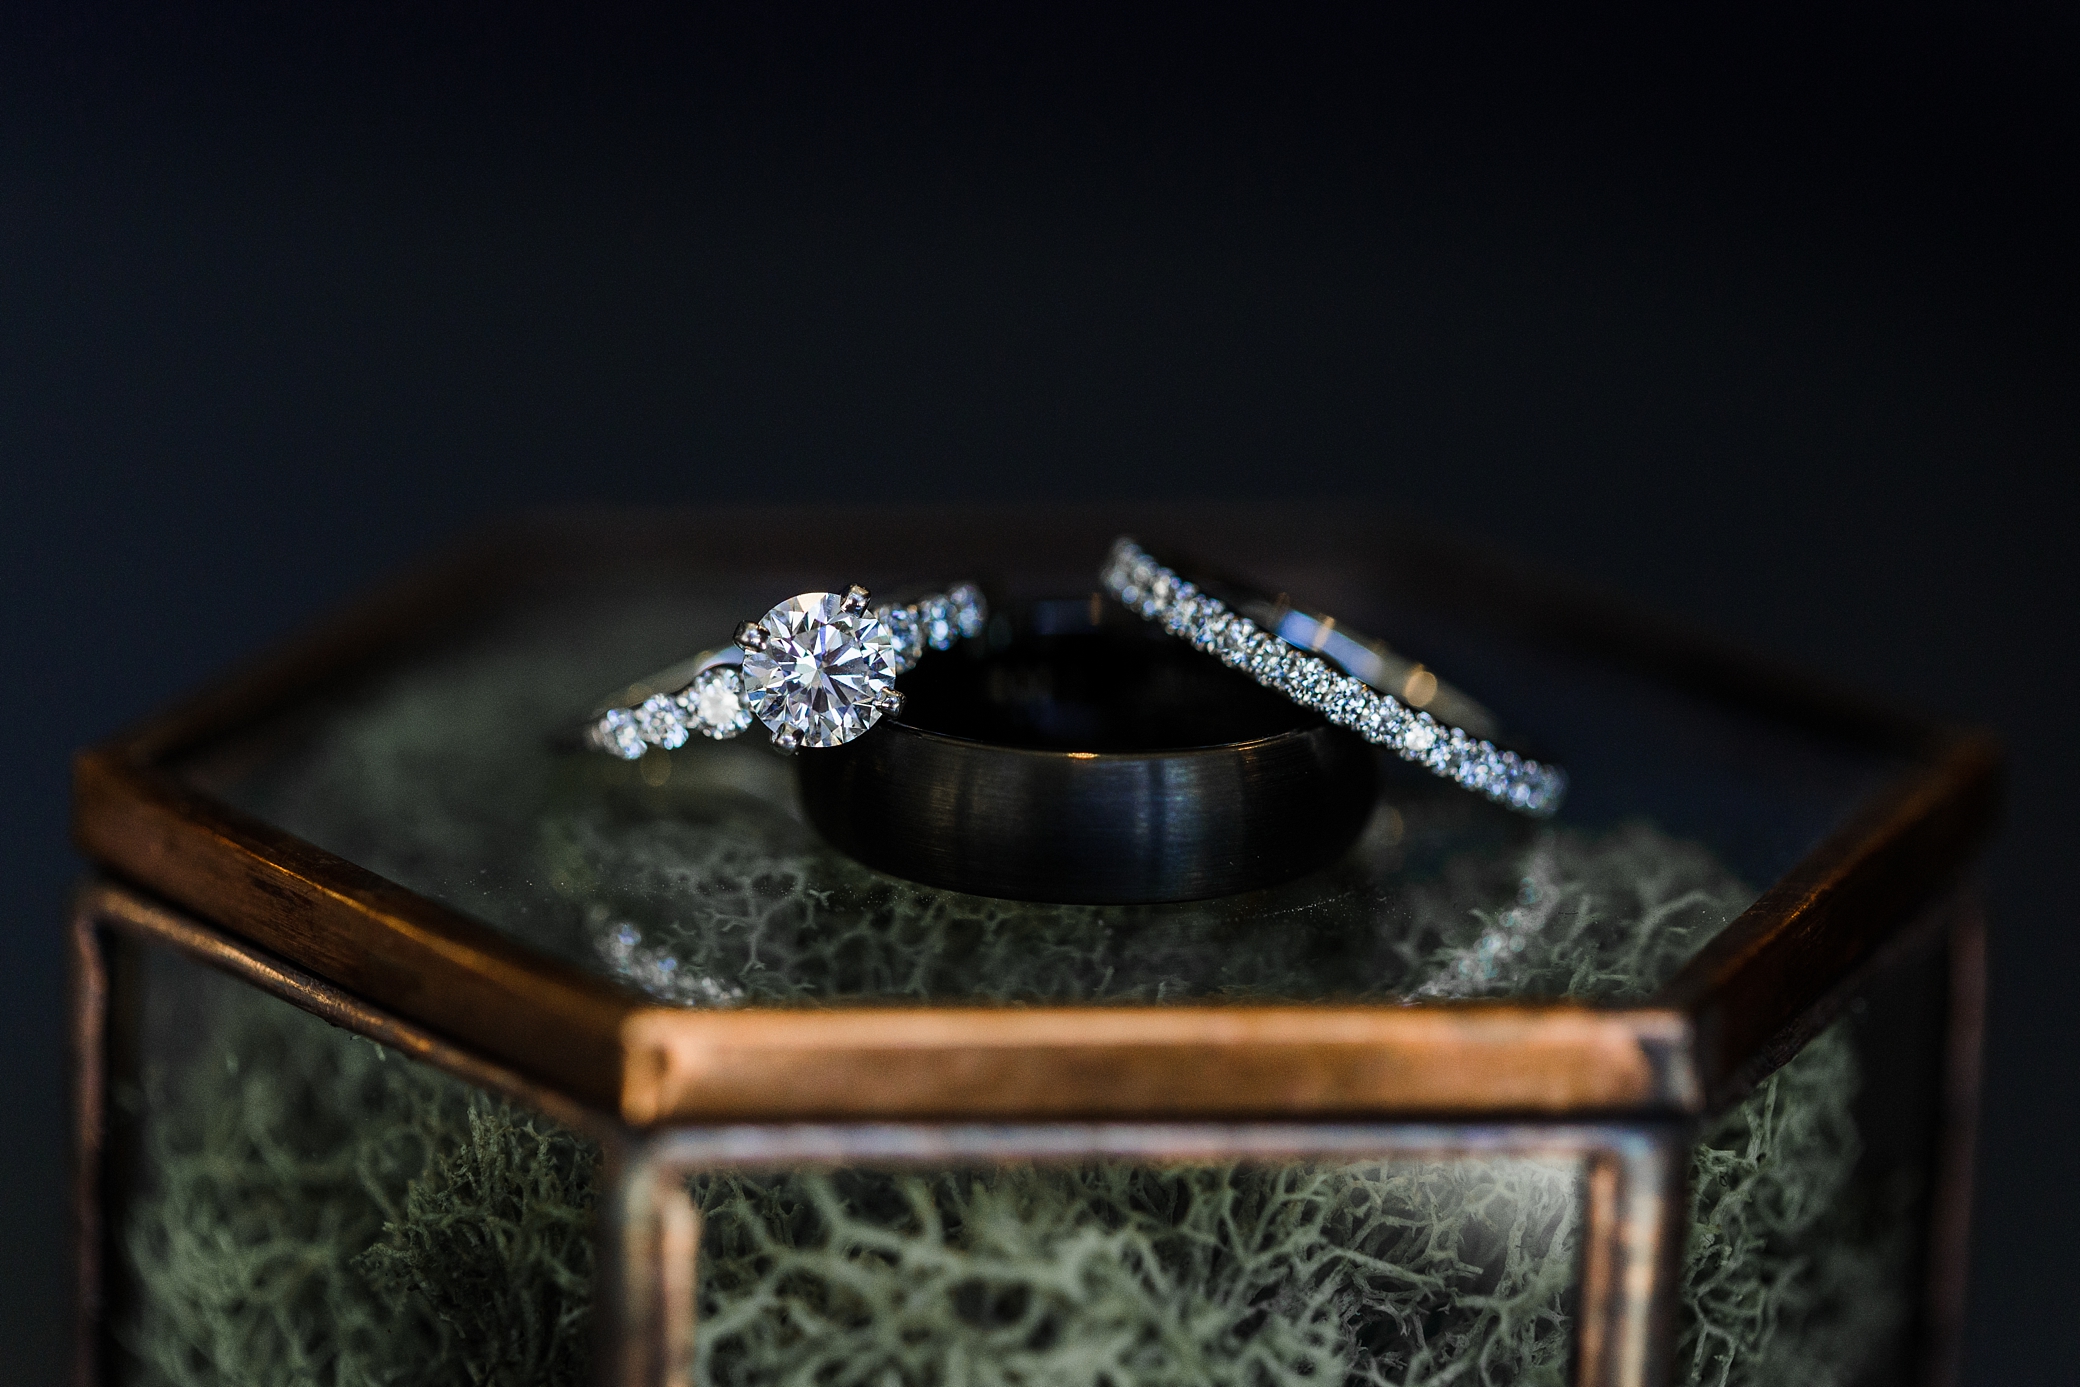 Wedding day details of bride and grooms rings | Megan Montalvo Photography 